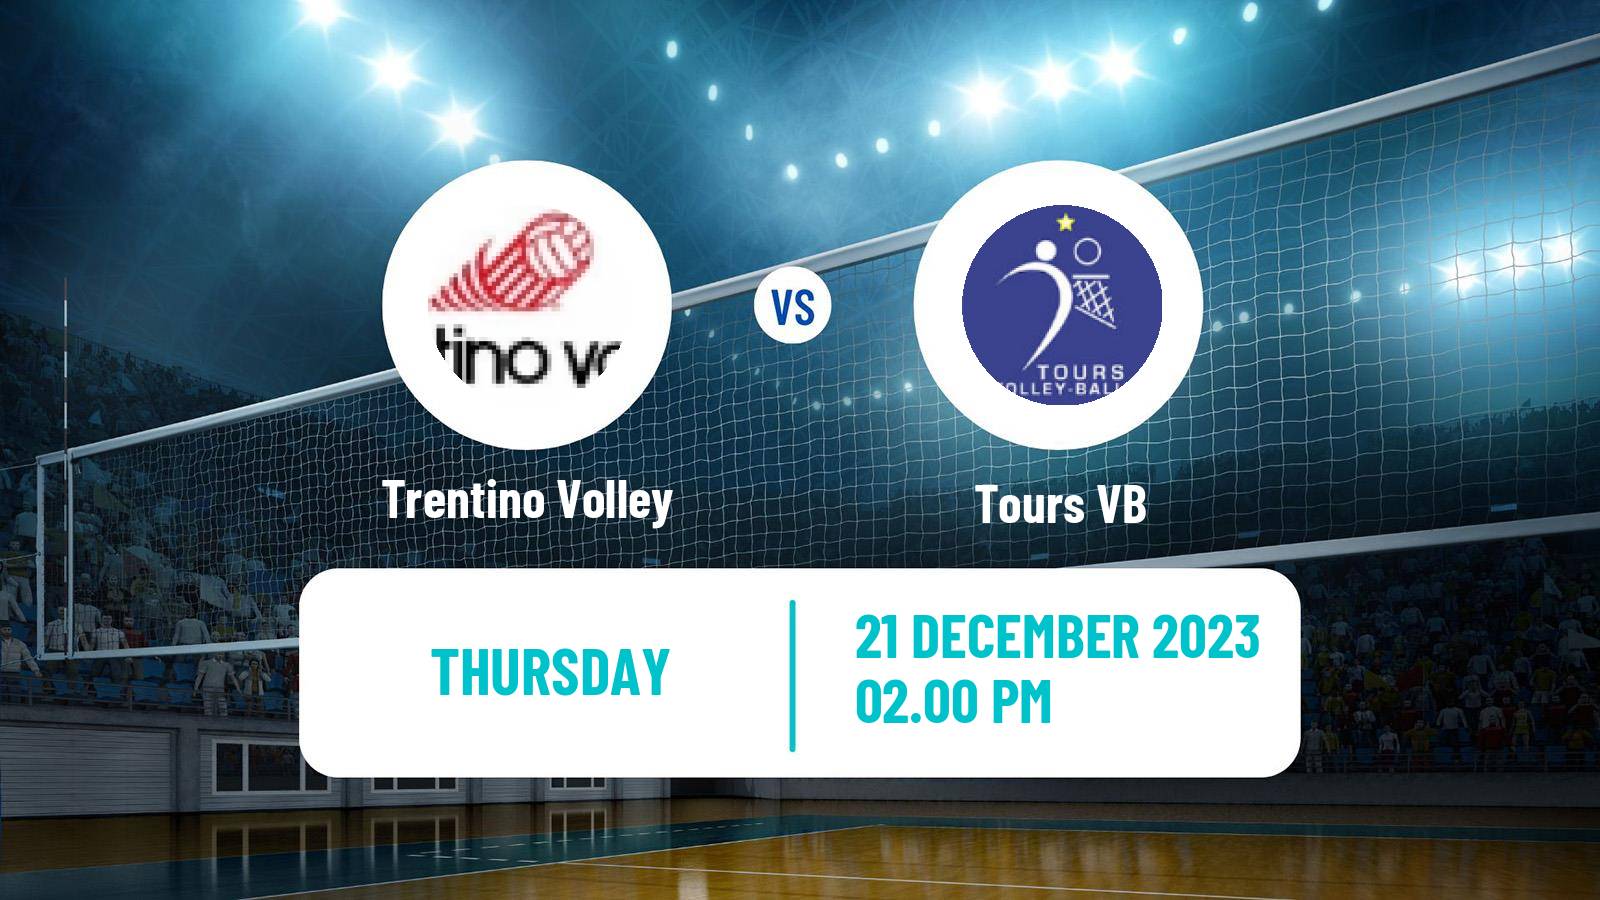 Volleyball CEV Champions League Trentino Volley - Tours VB